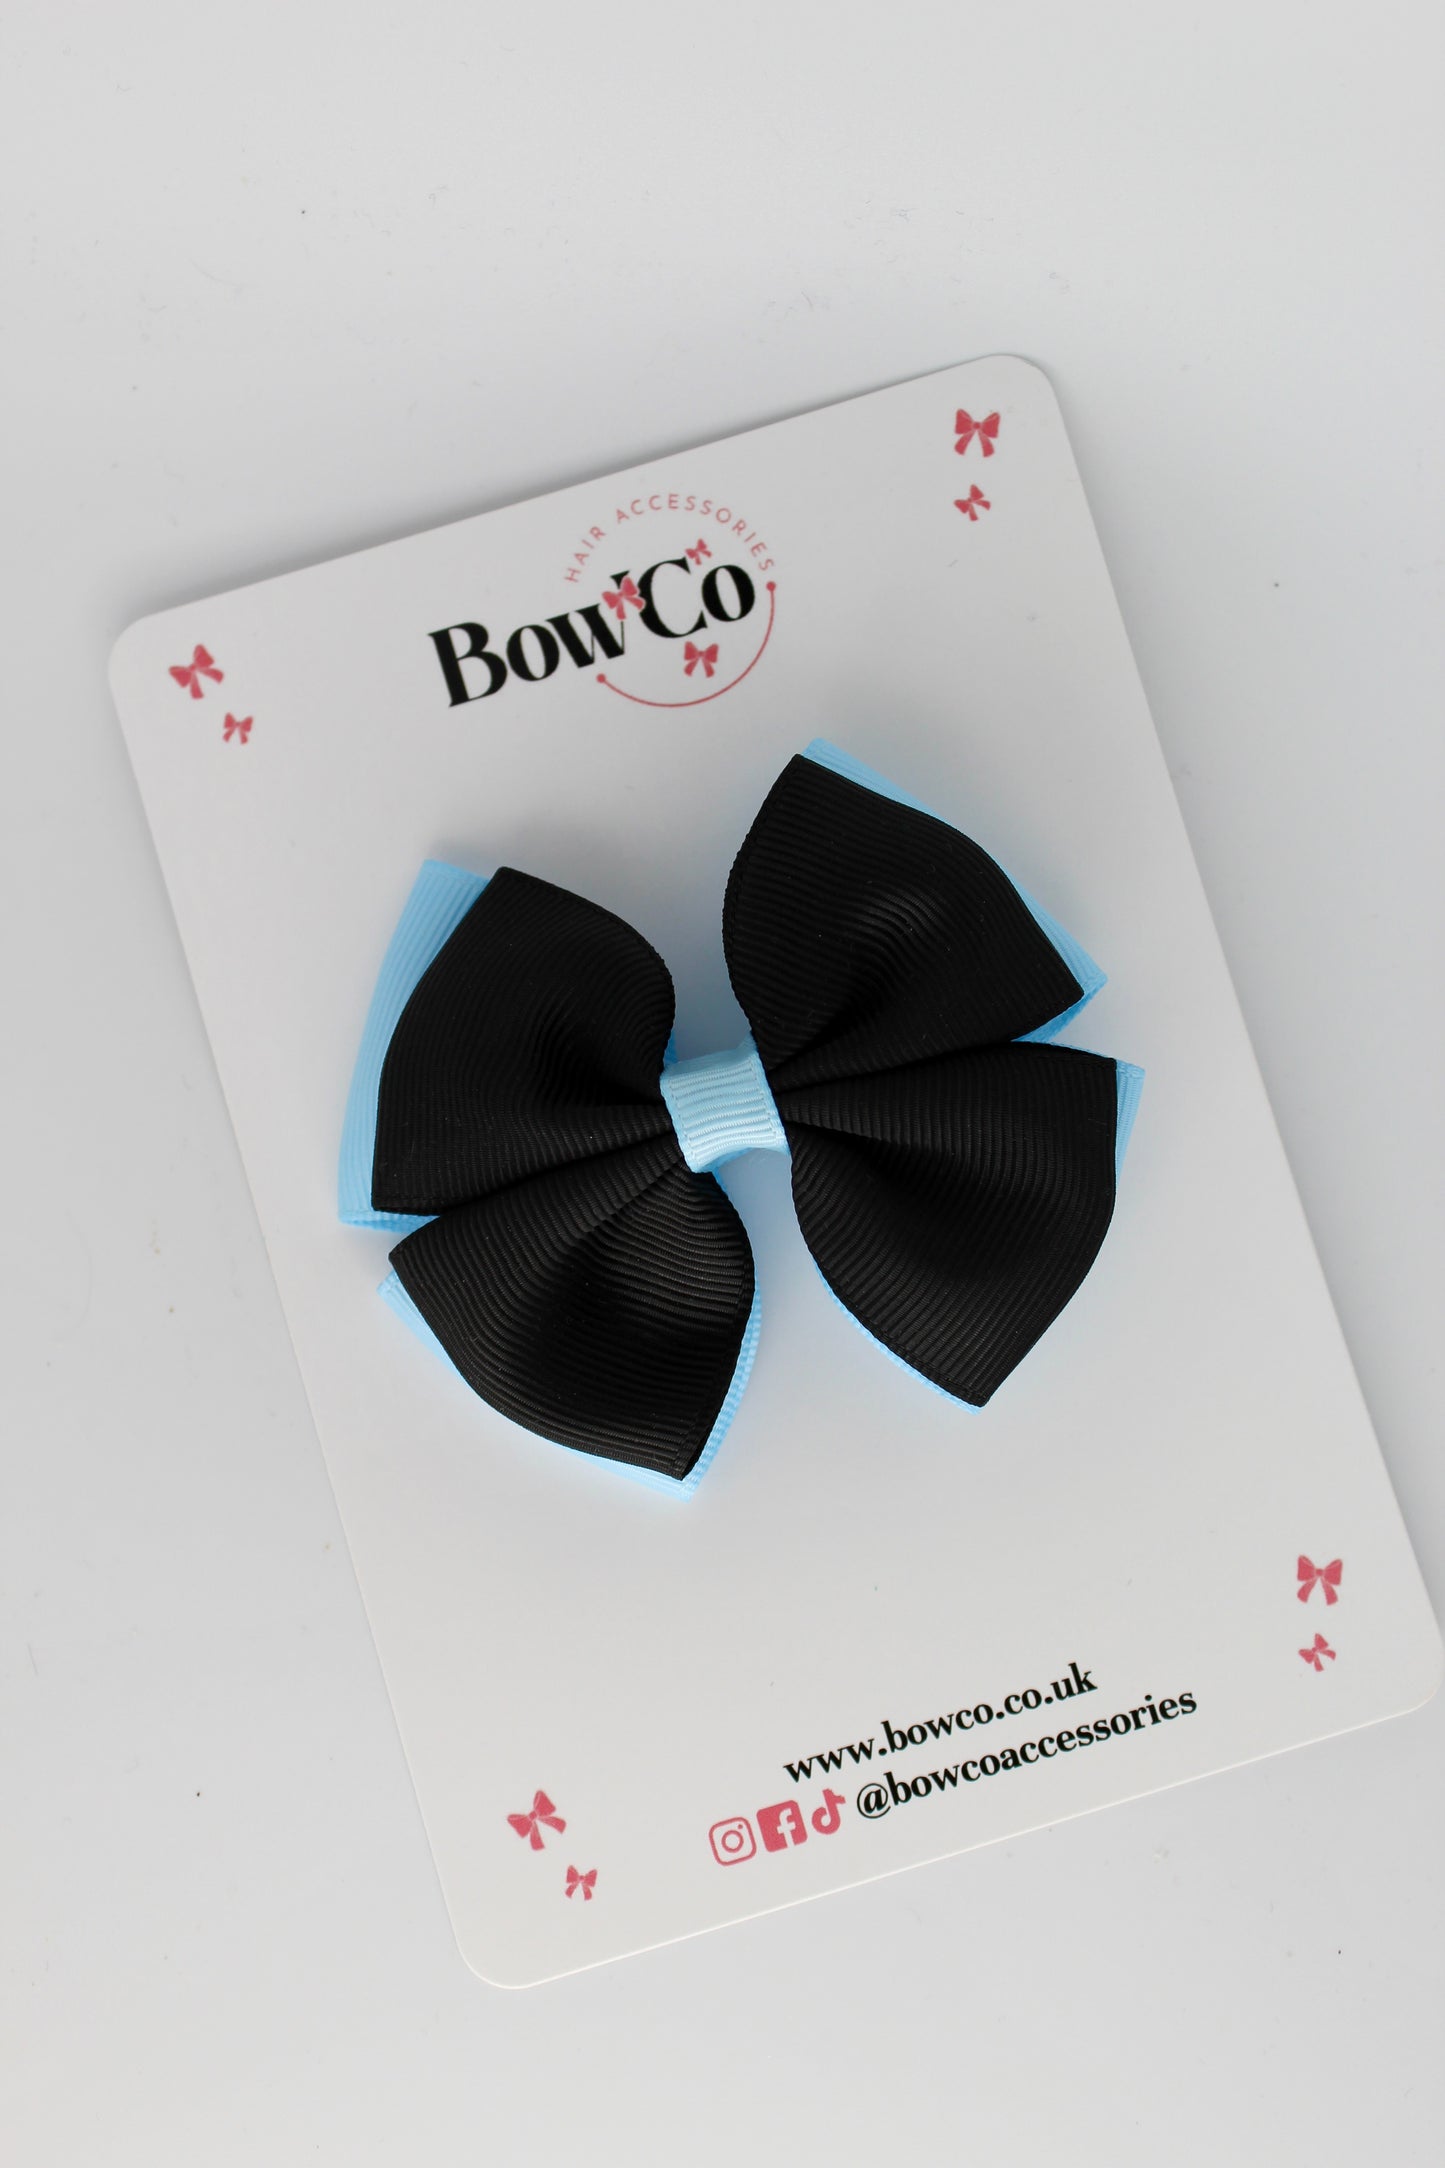 3 Inch Double Layer Bow - Clip - Black and Blue Topaz